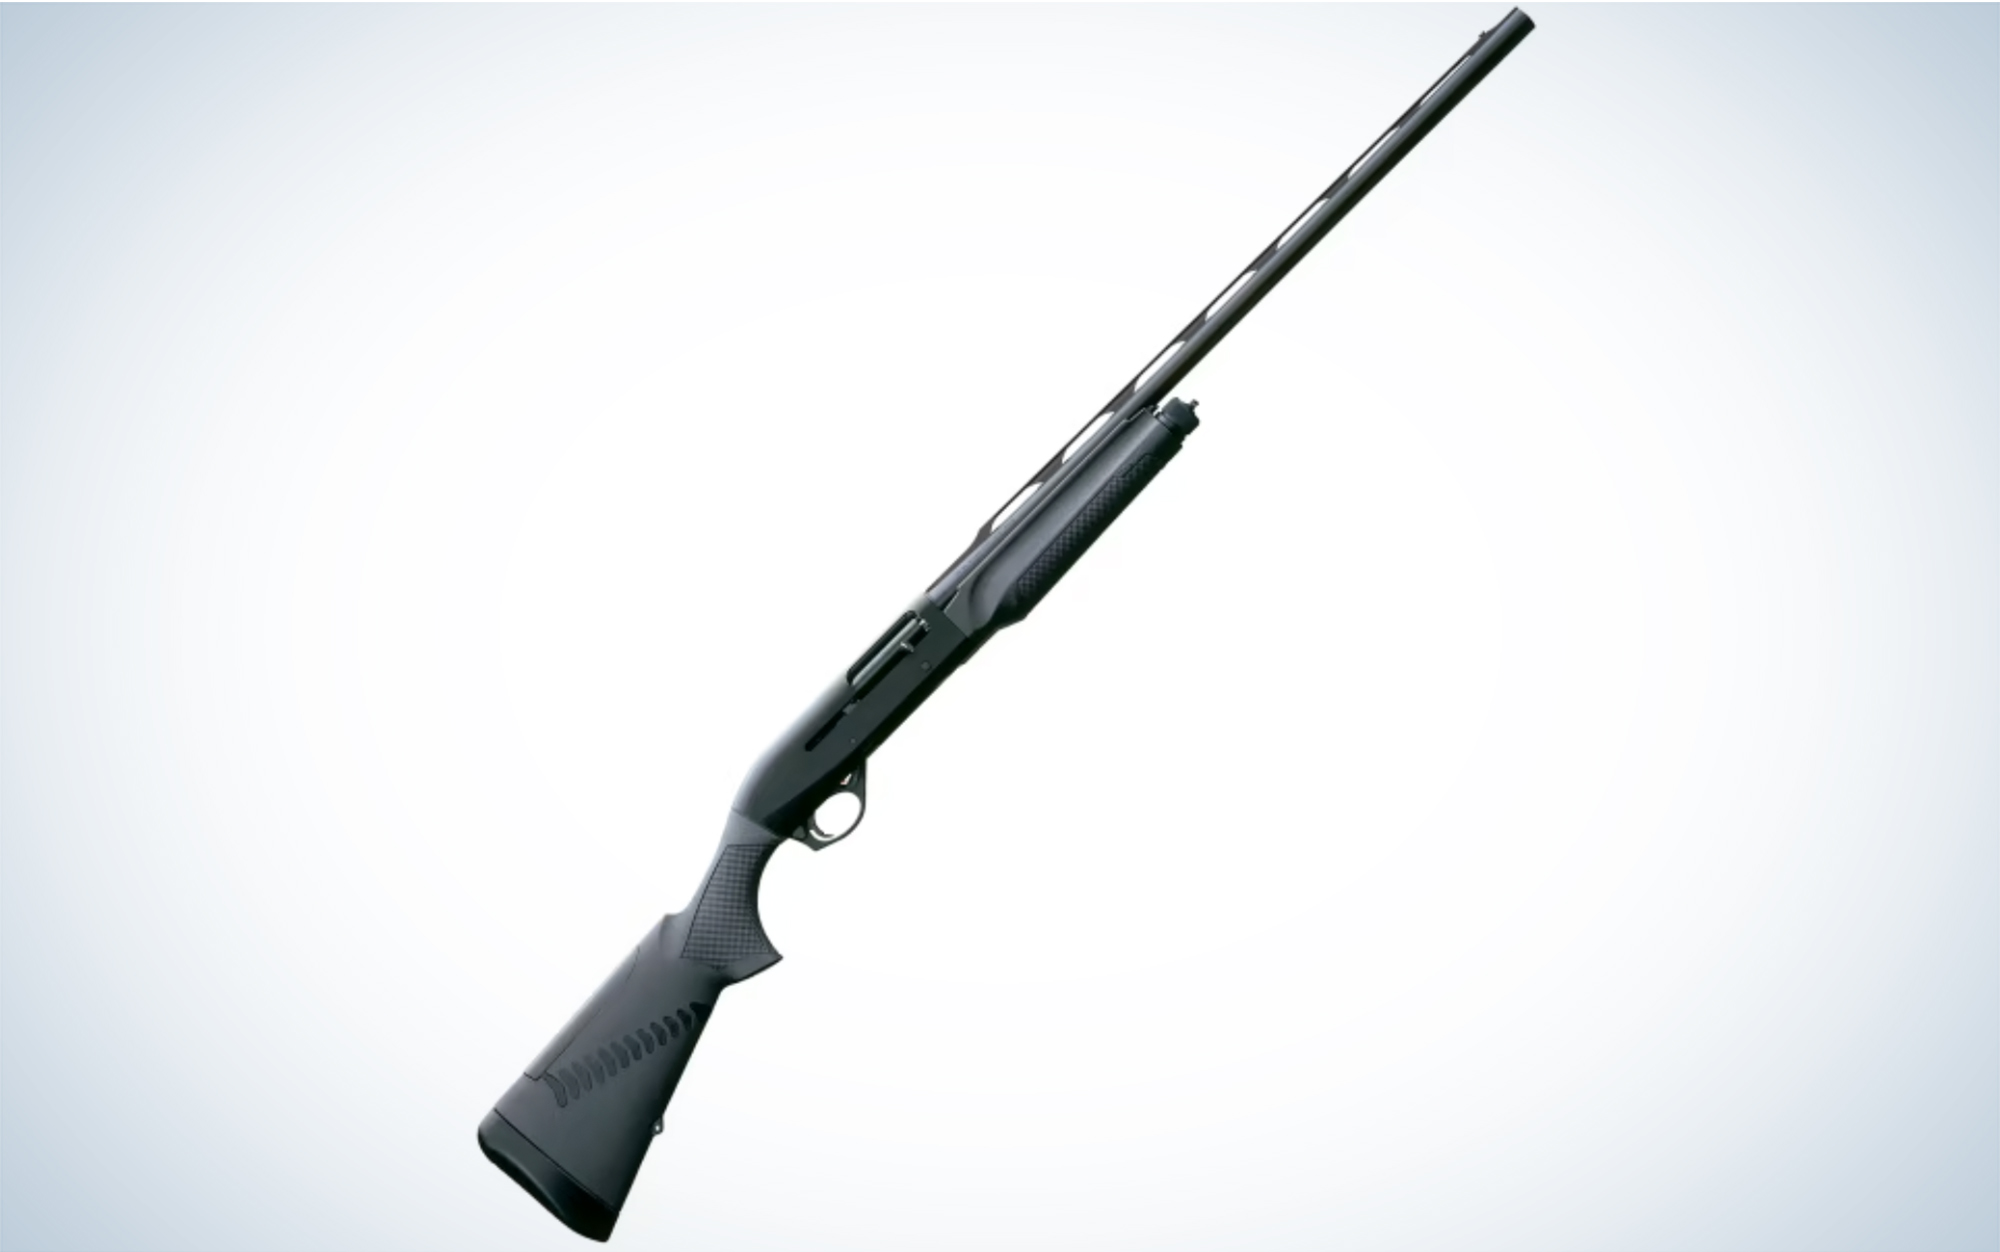 The Benelli M2 20-Gauge is one of the best duck hunting shotguns.